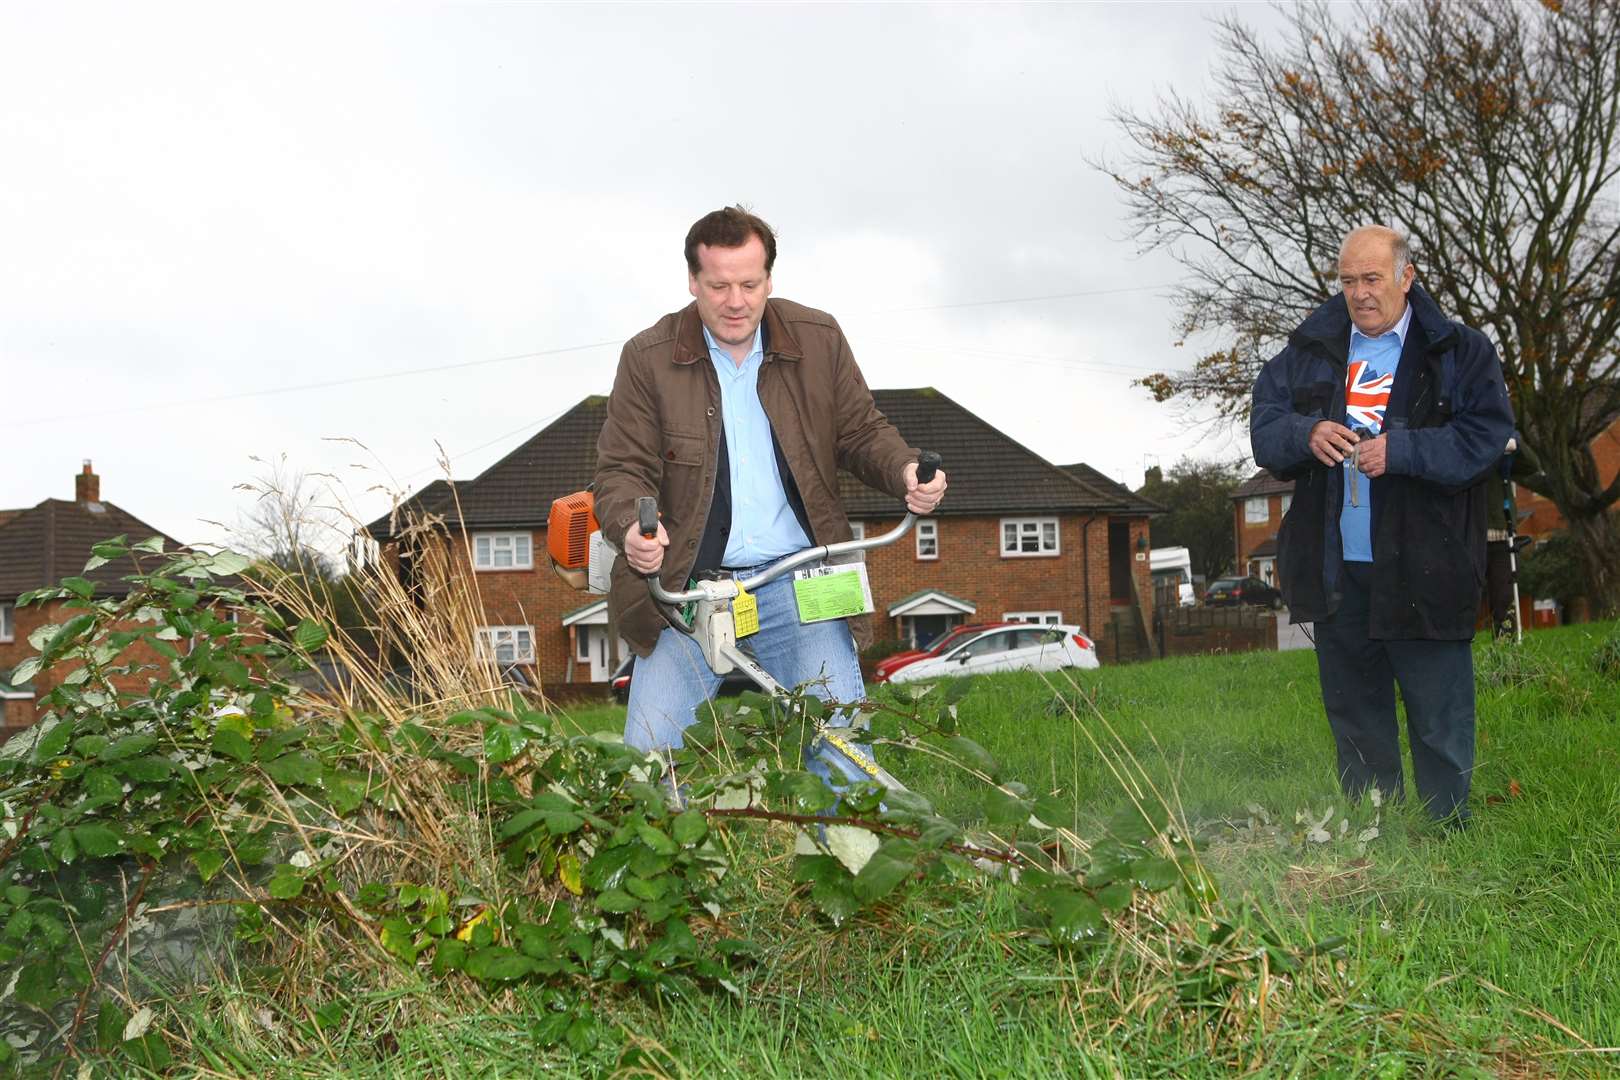 Charlie Elphicke and volunteers cut and clear the grass area in Freemans Way, Deal